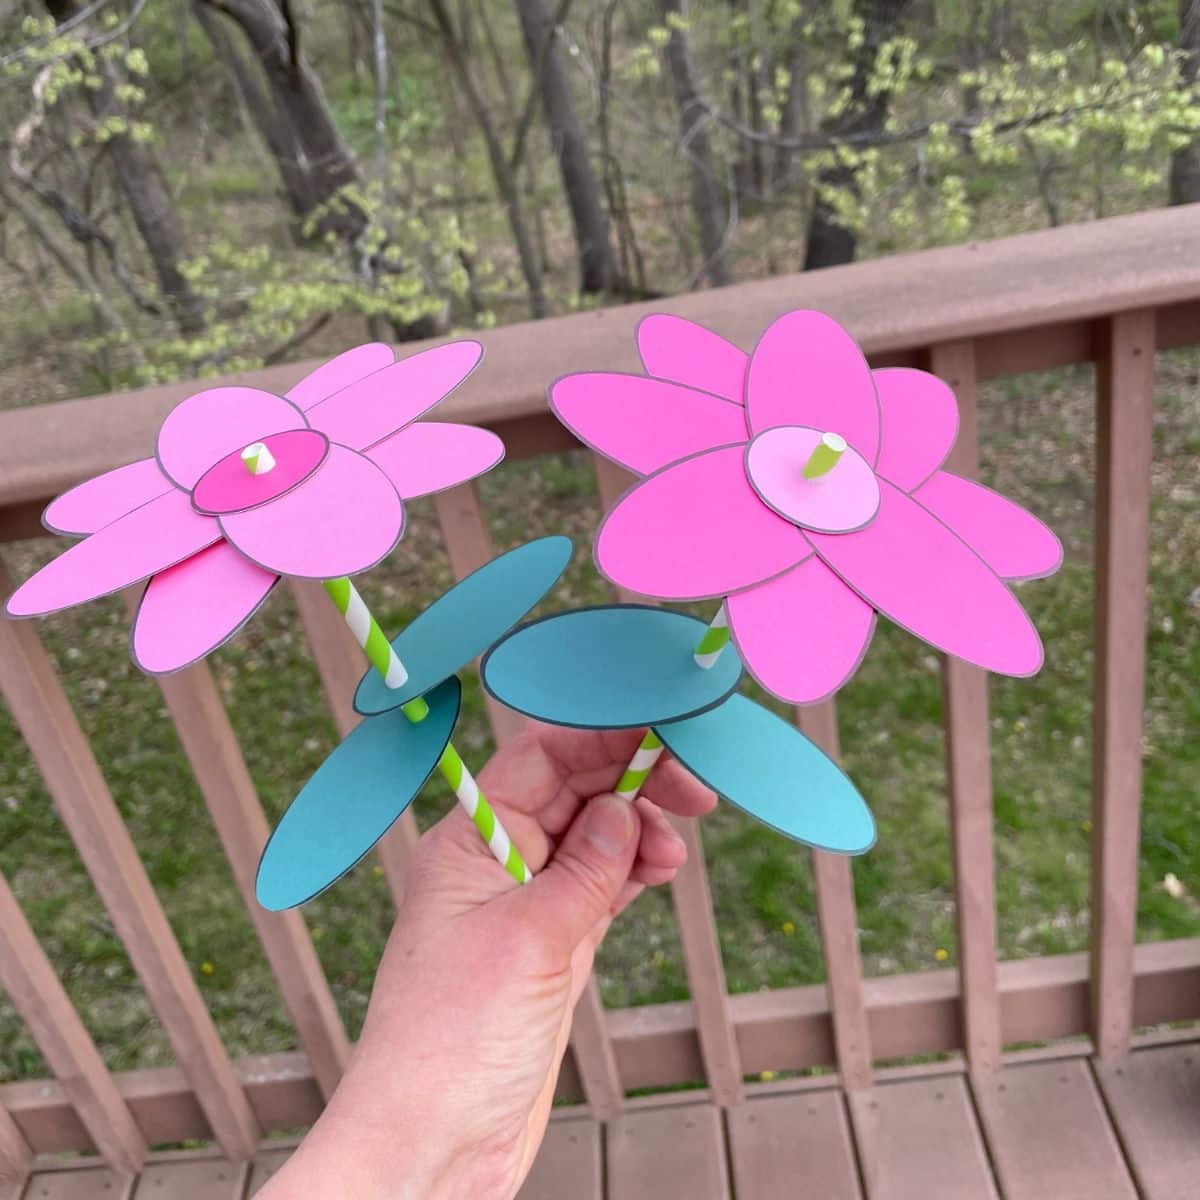 Flower Crafts - Over 100 Fabulous Flower Crafts To Delight Your